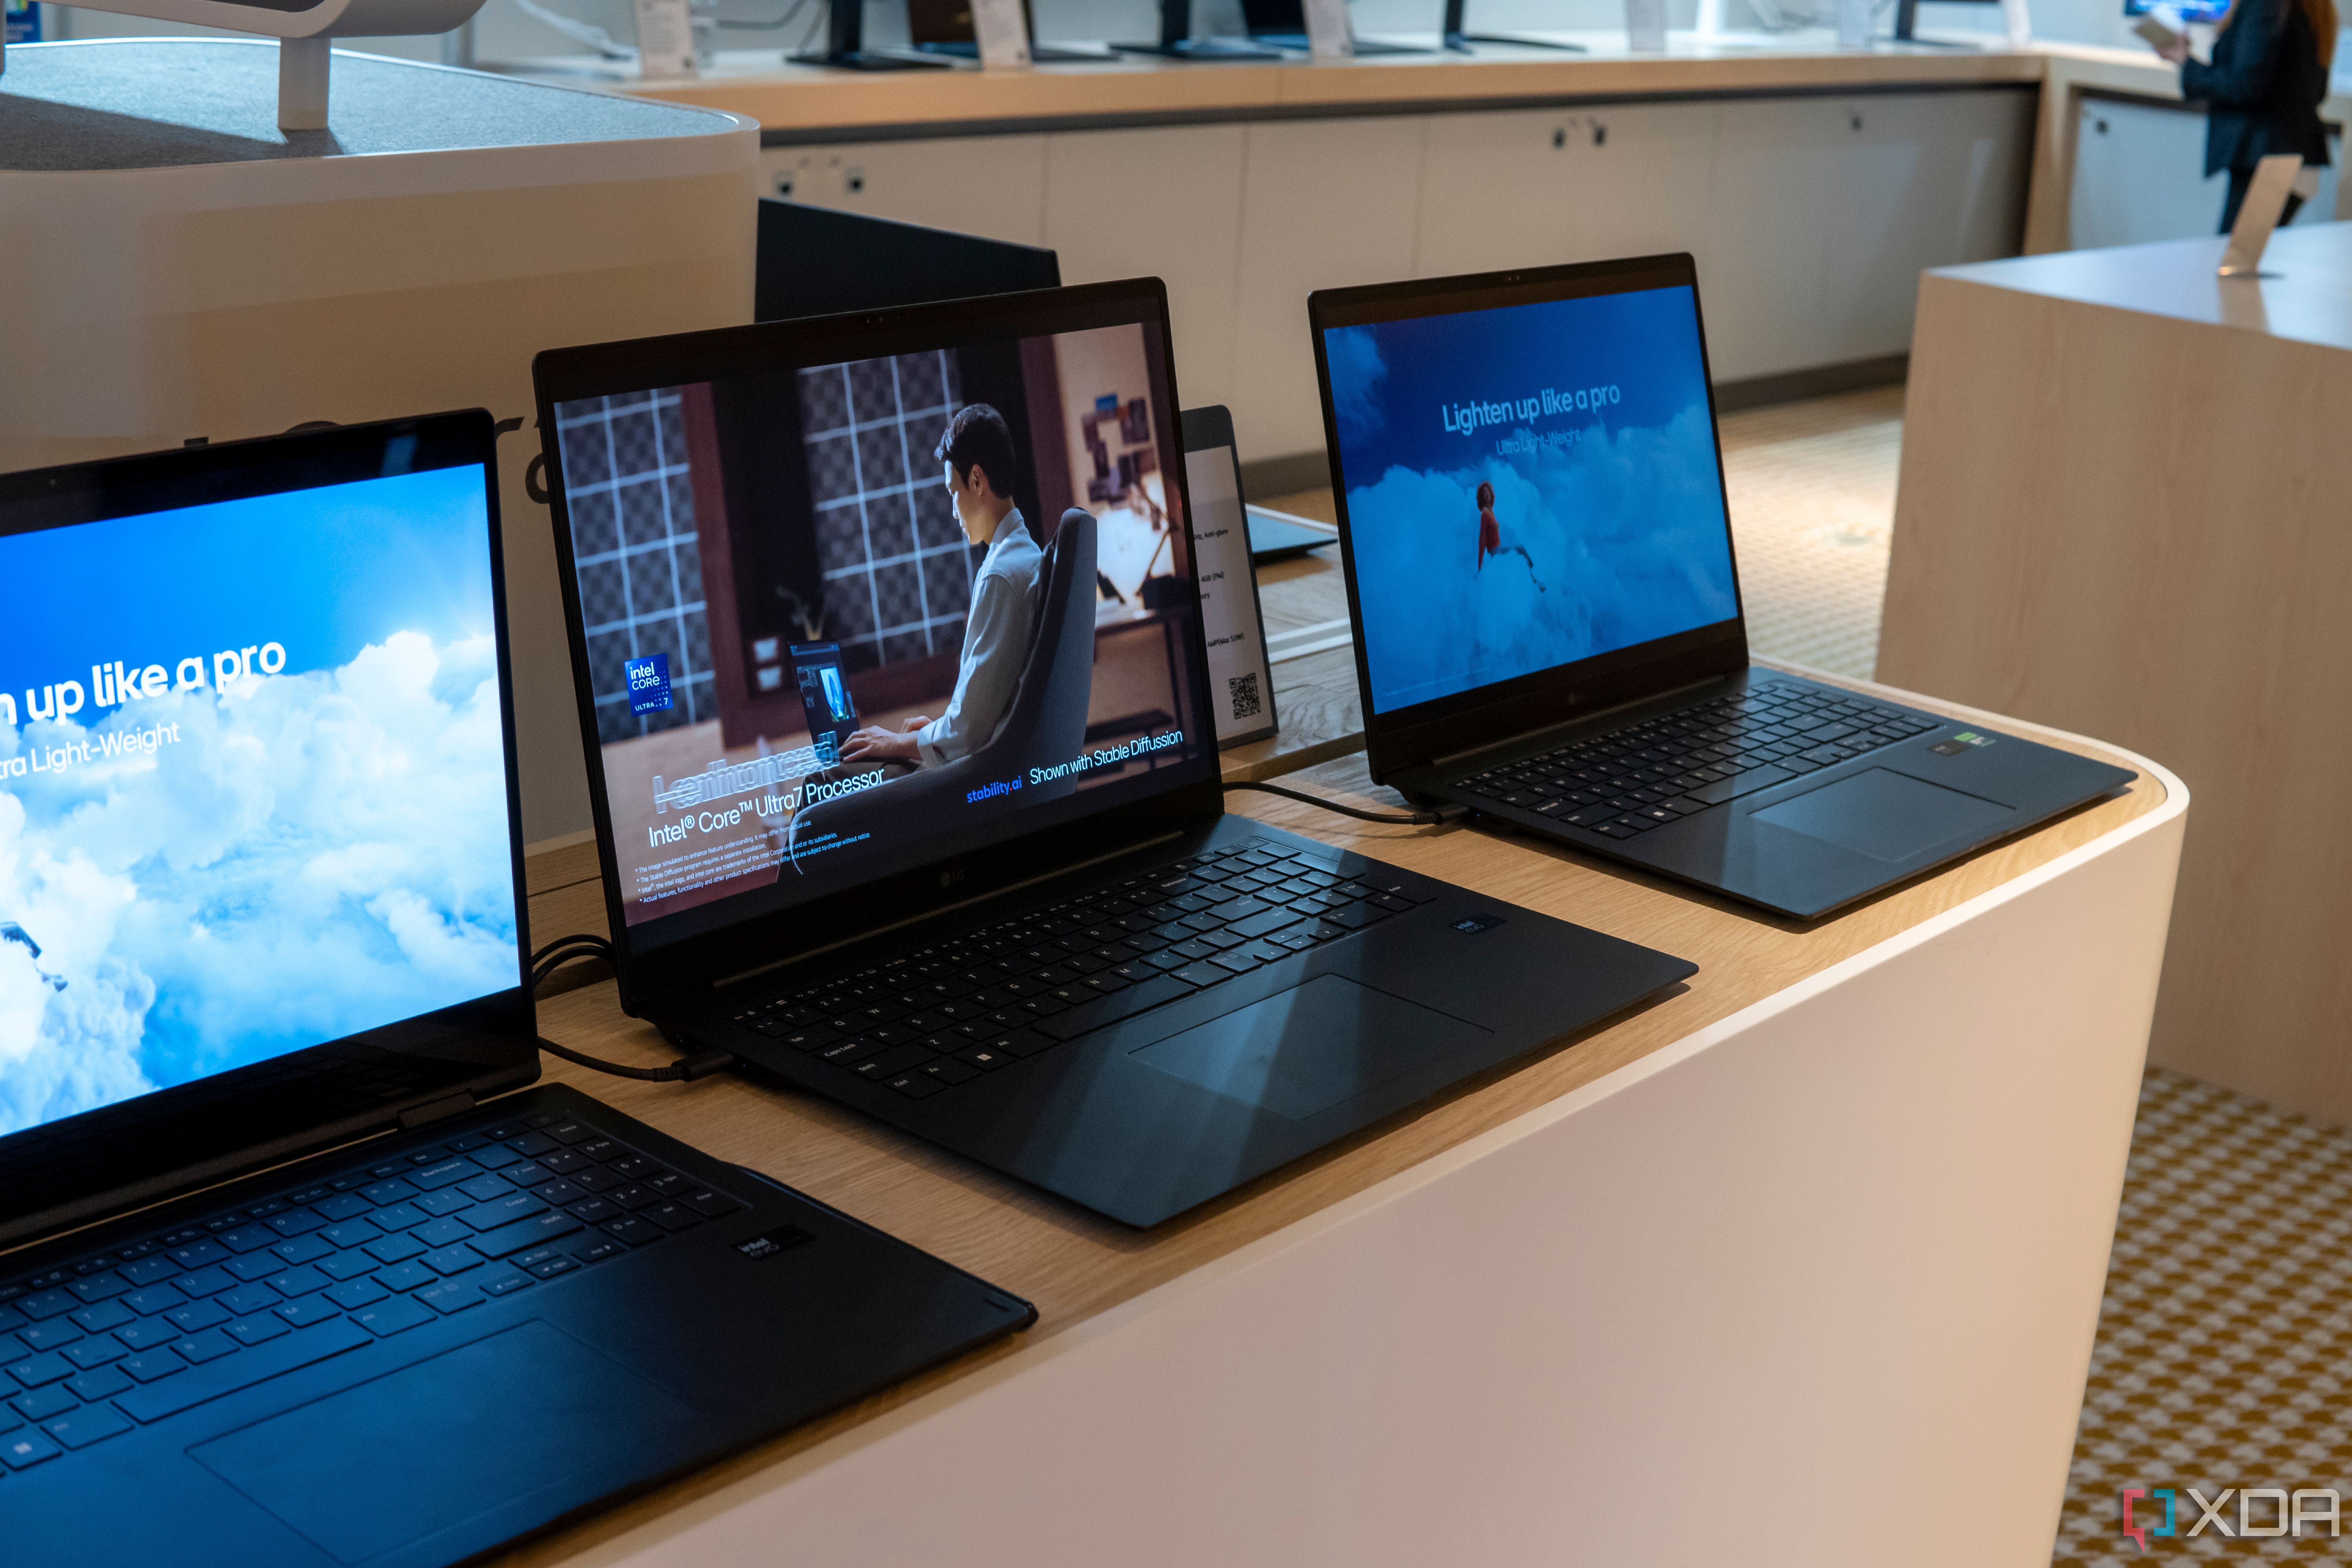 LG Gram Pro laptops with the 17-inch model in the center